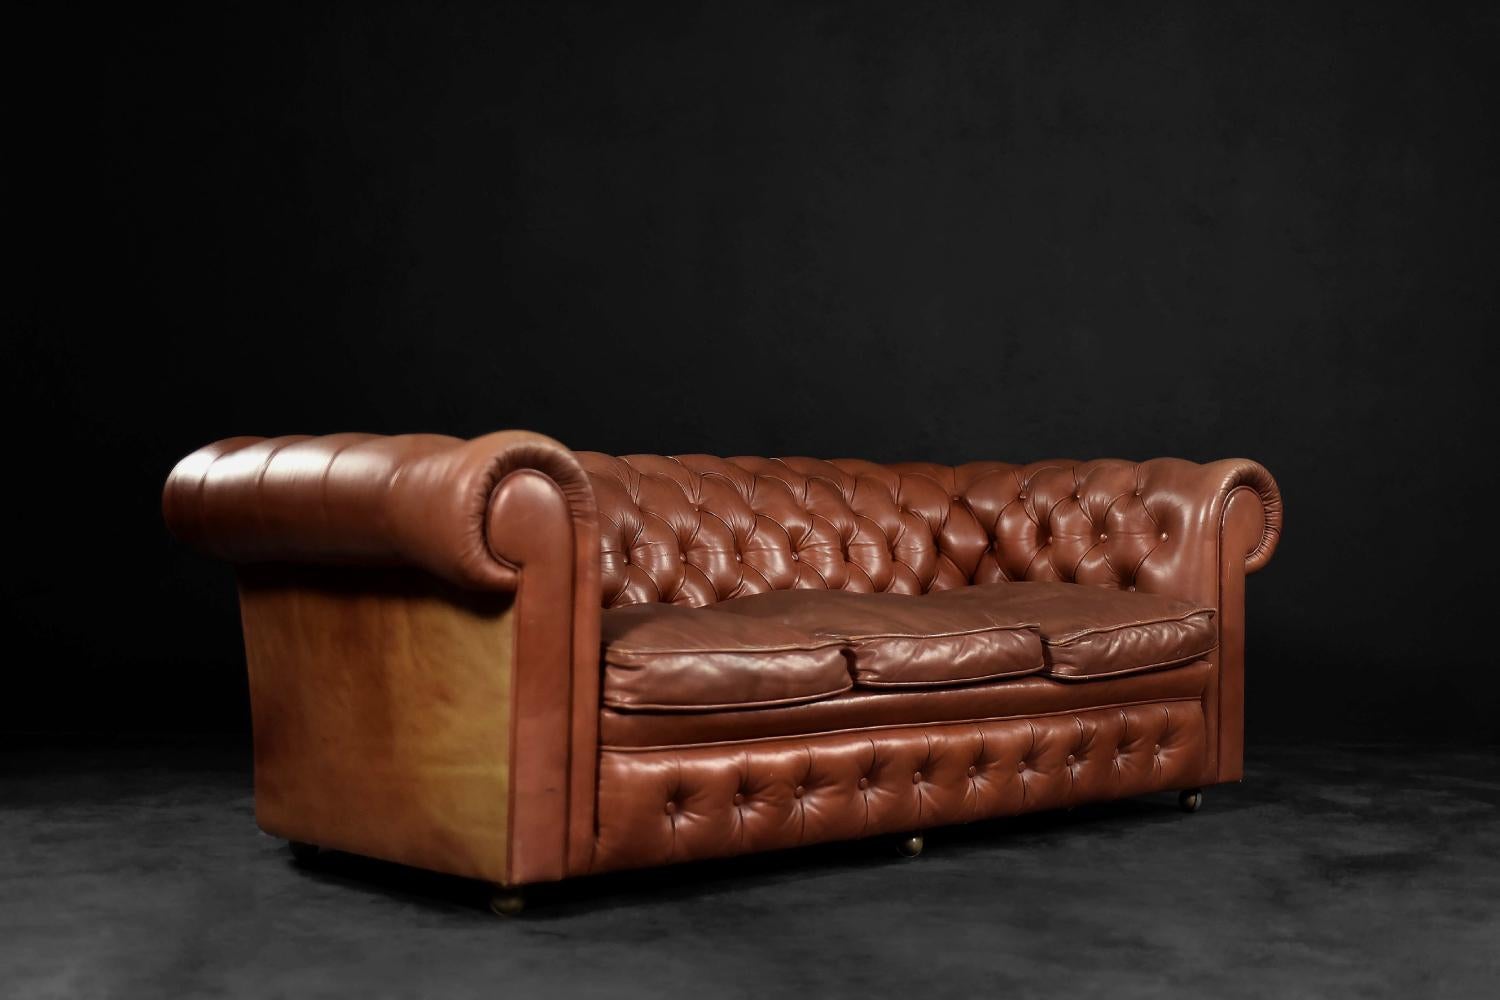 This original three-seater leather Chesterfield sofa was made by Artistic Upholestery Limited in England during the 1950s. It is an example of the classic English style from the 19th century. The item has original sign. It is one of the most